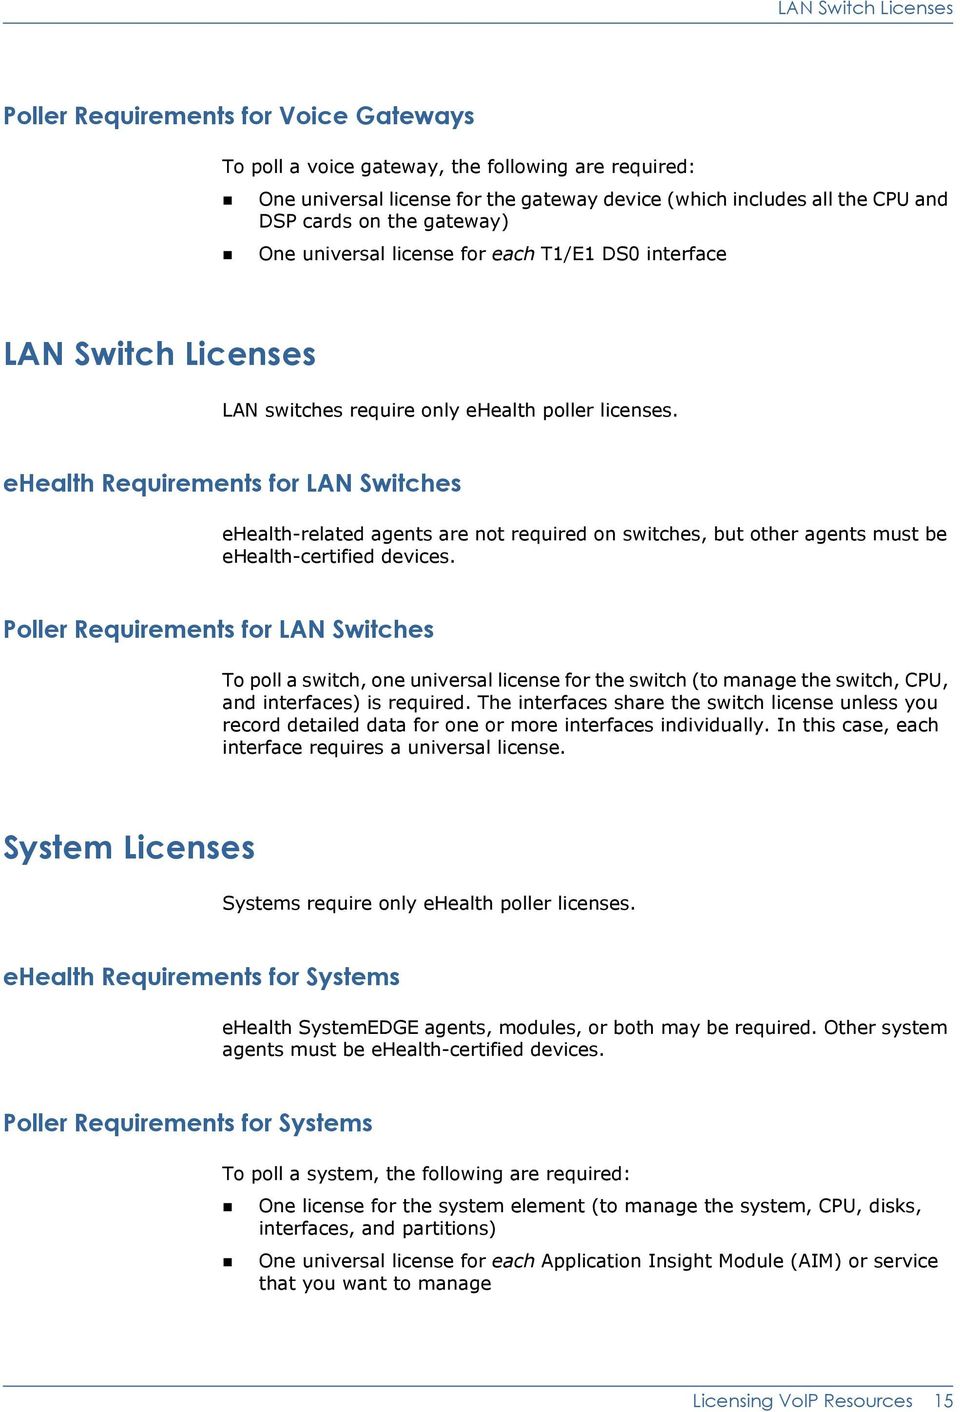 ehealth Requirements for LAN Switches ehealth-related agents are not required on switches, but other agents must be ehealth-certified devices.